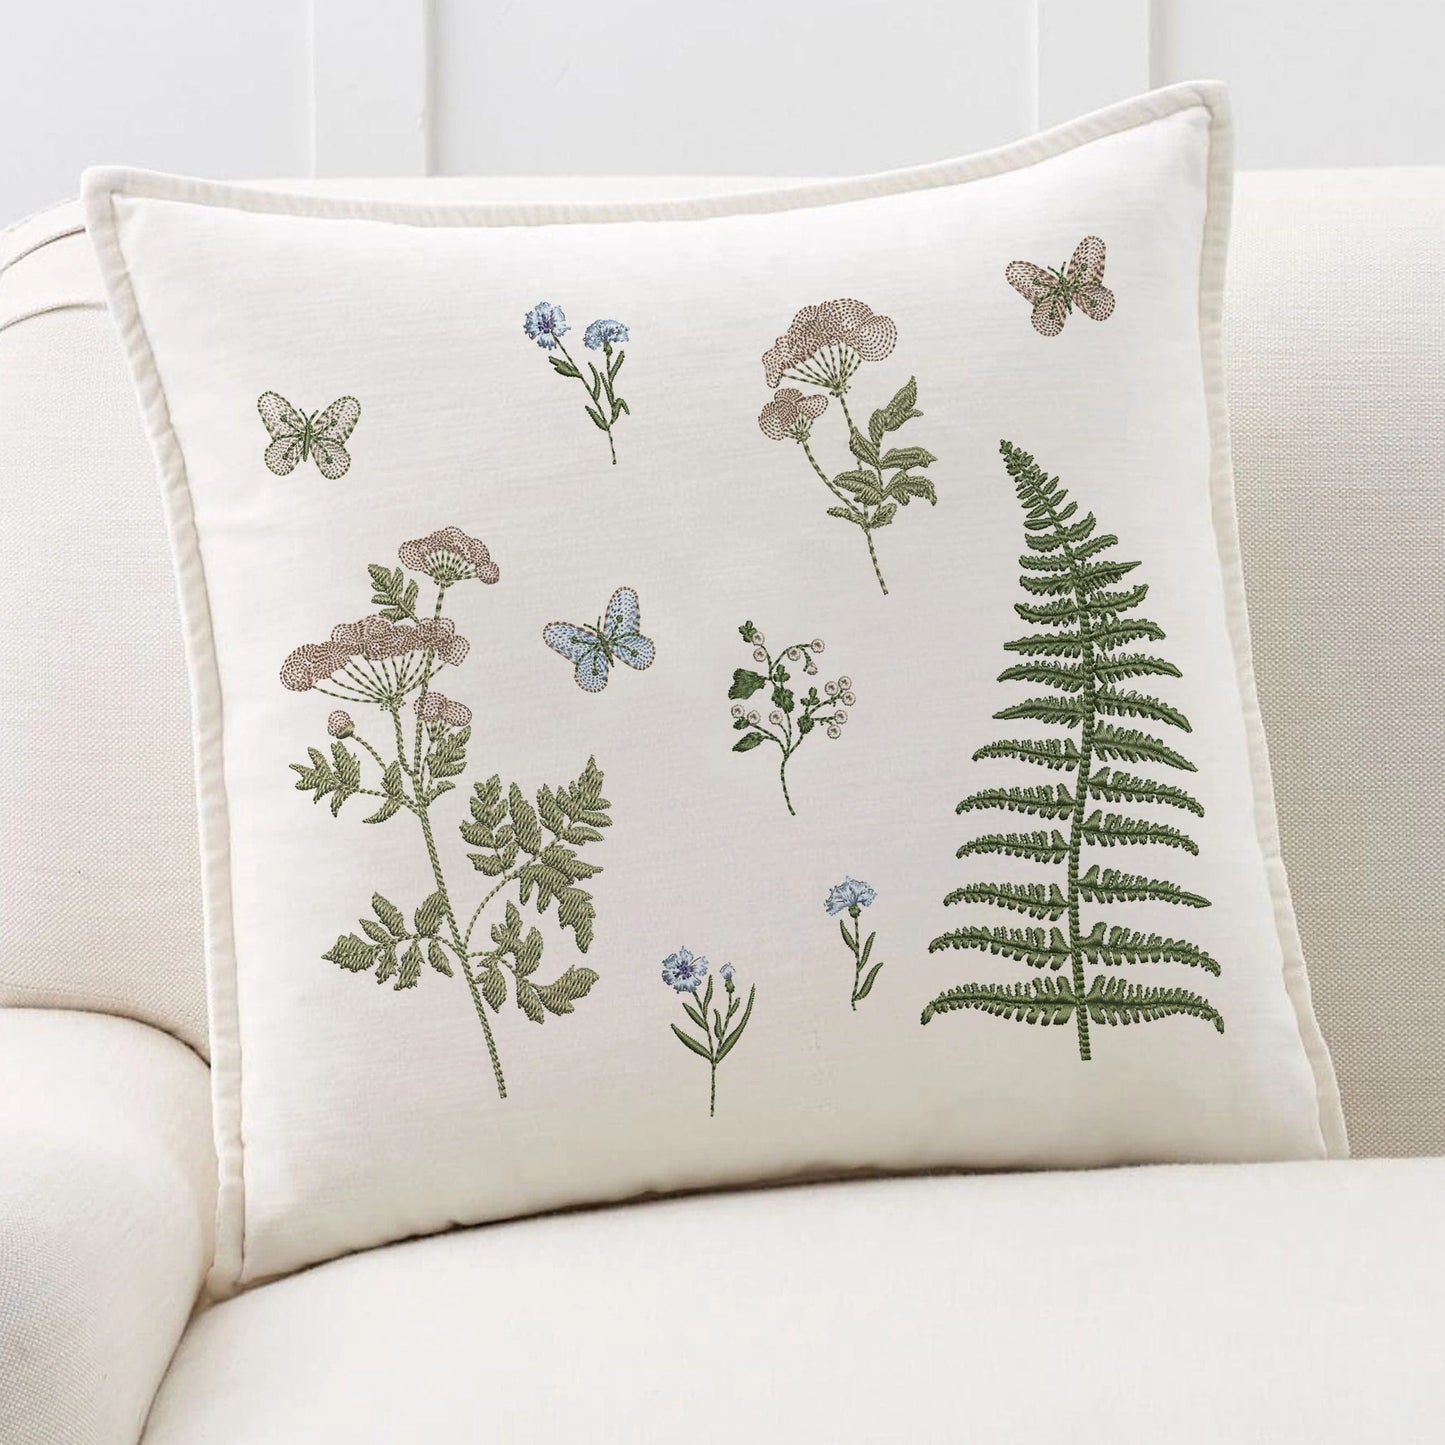 Fern and Flowers Machine Embroidery Design on pillow